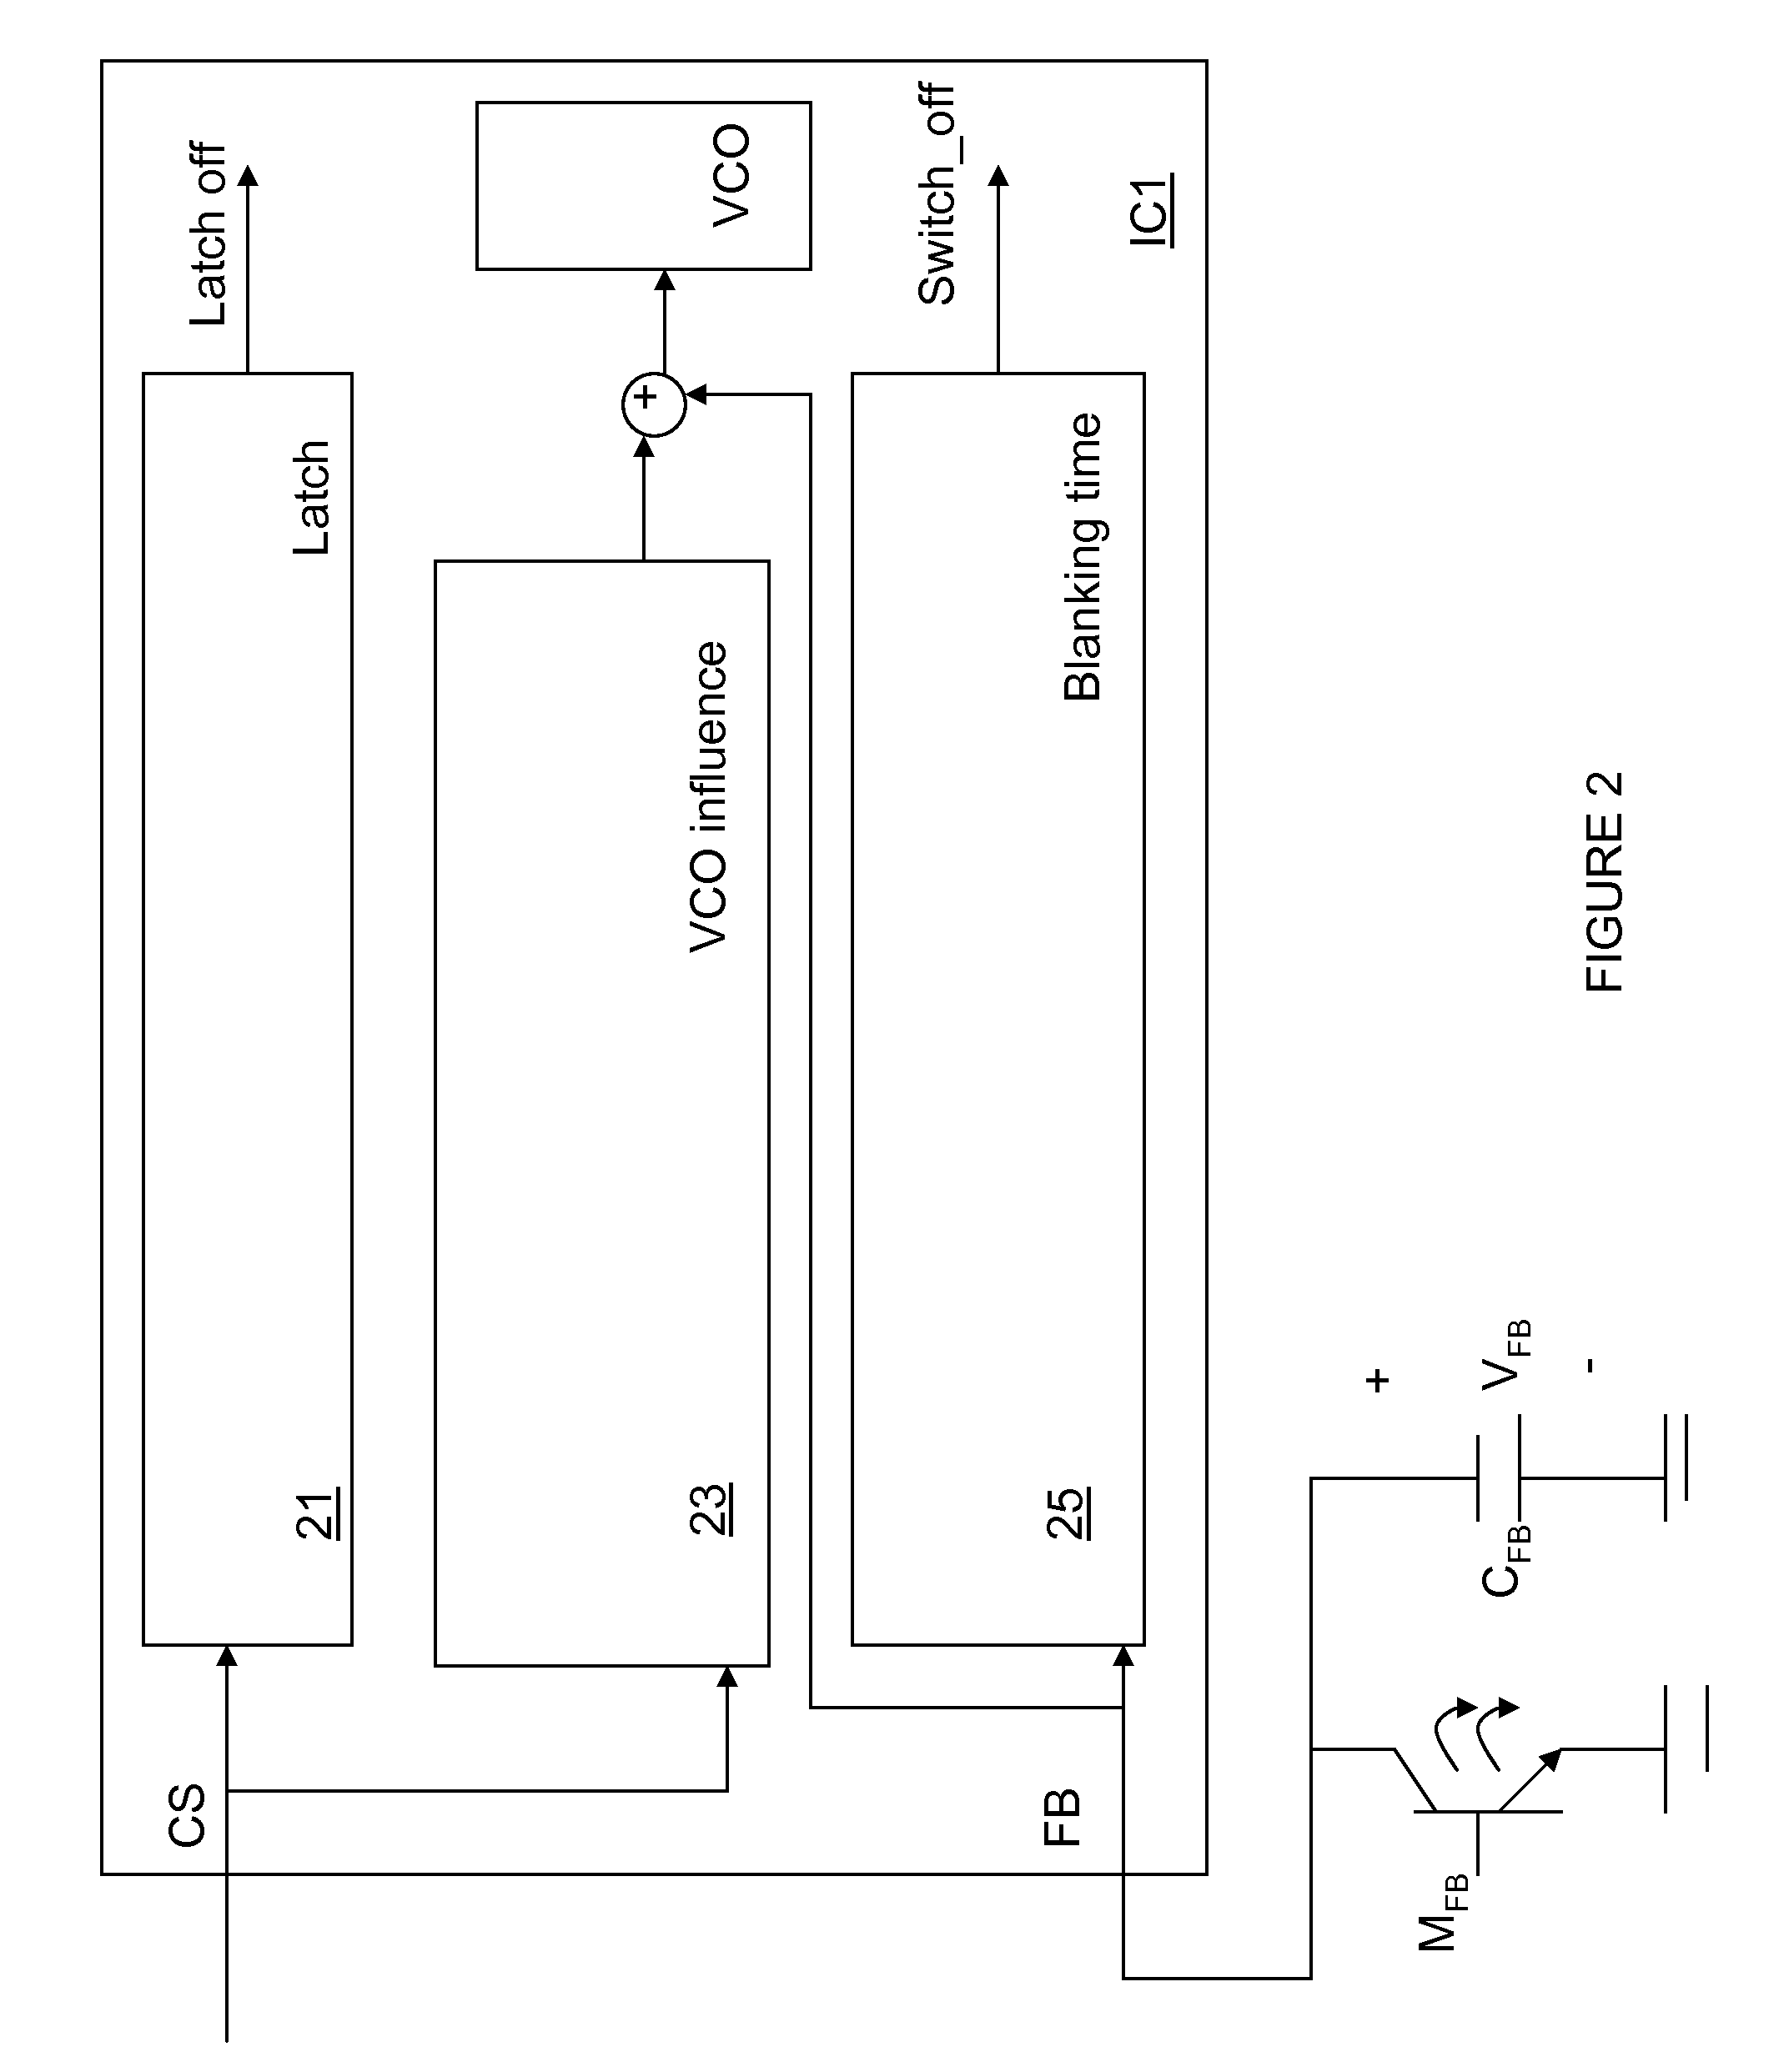 Over current protection circuit and method